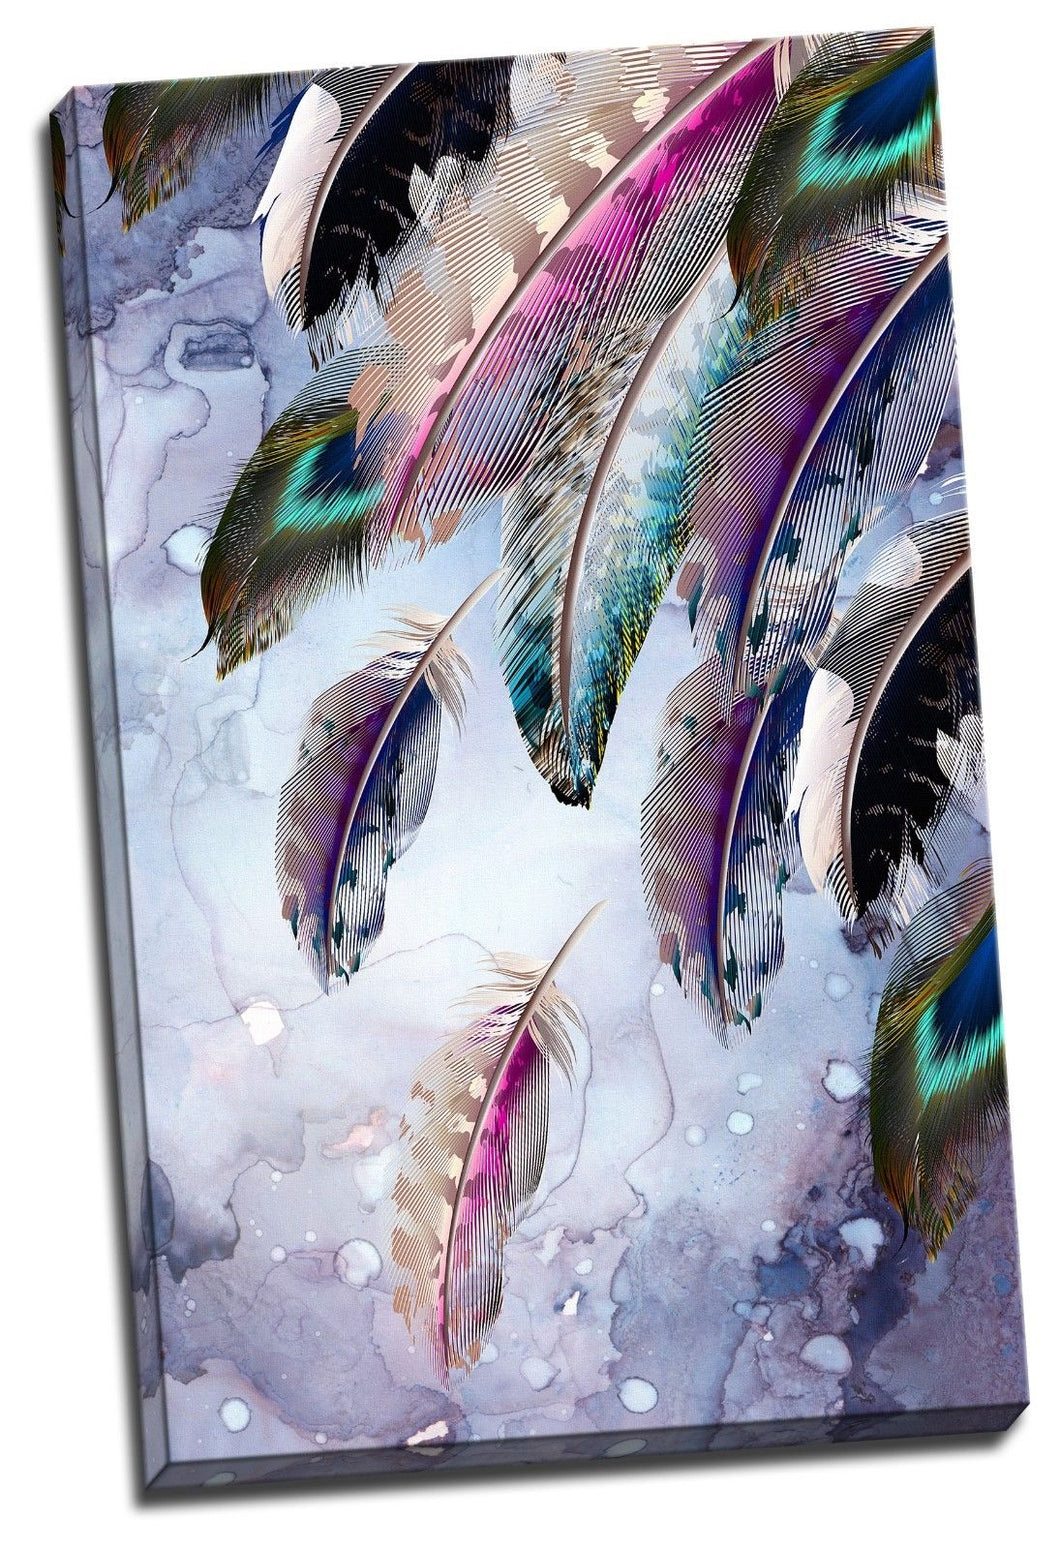 Colourful Peacock Feather Framed Canvas Print Abstract Living Room Wall